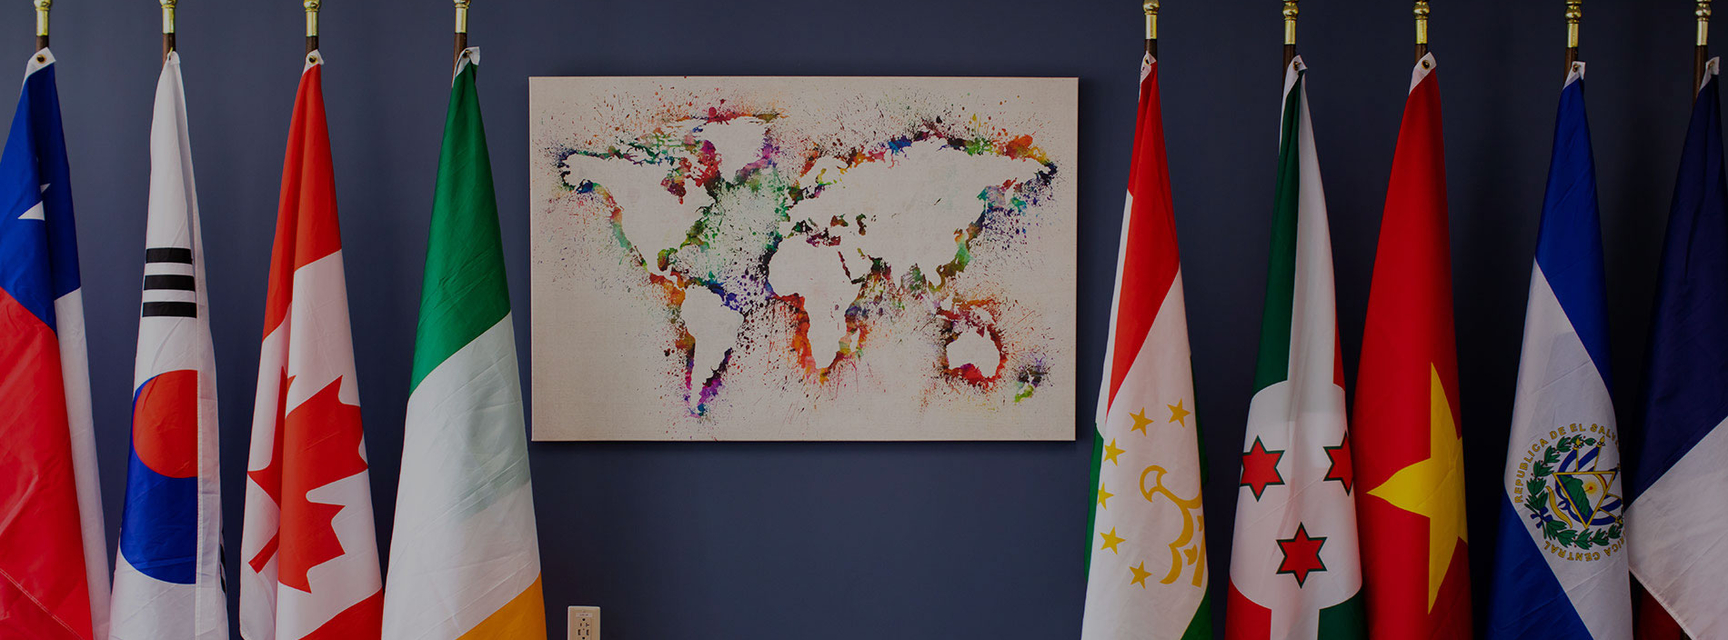 International flags next to a map of the world